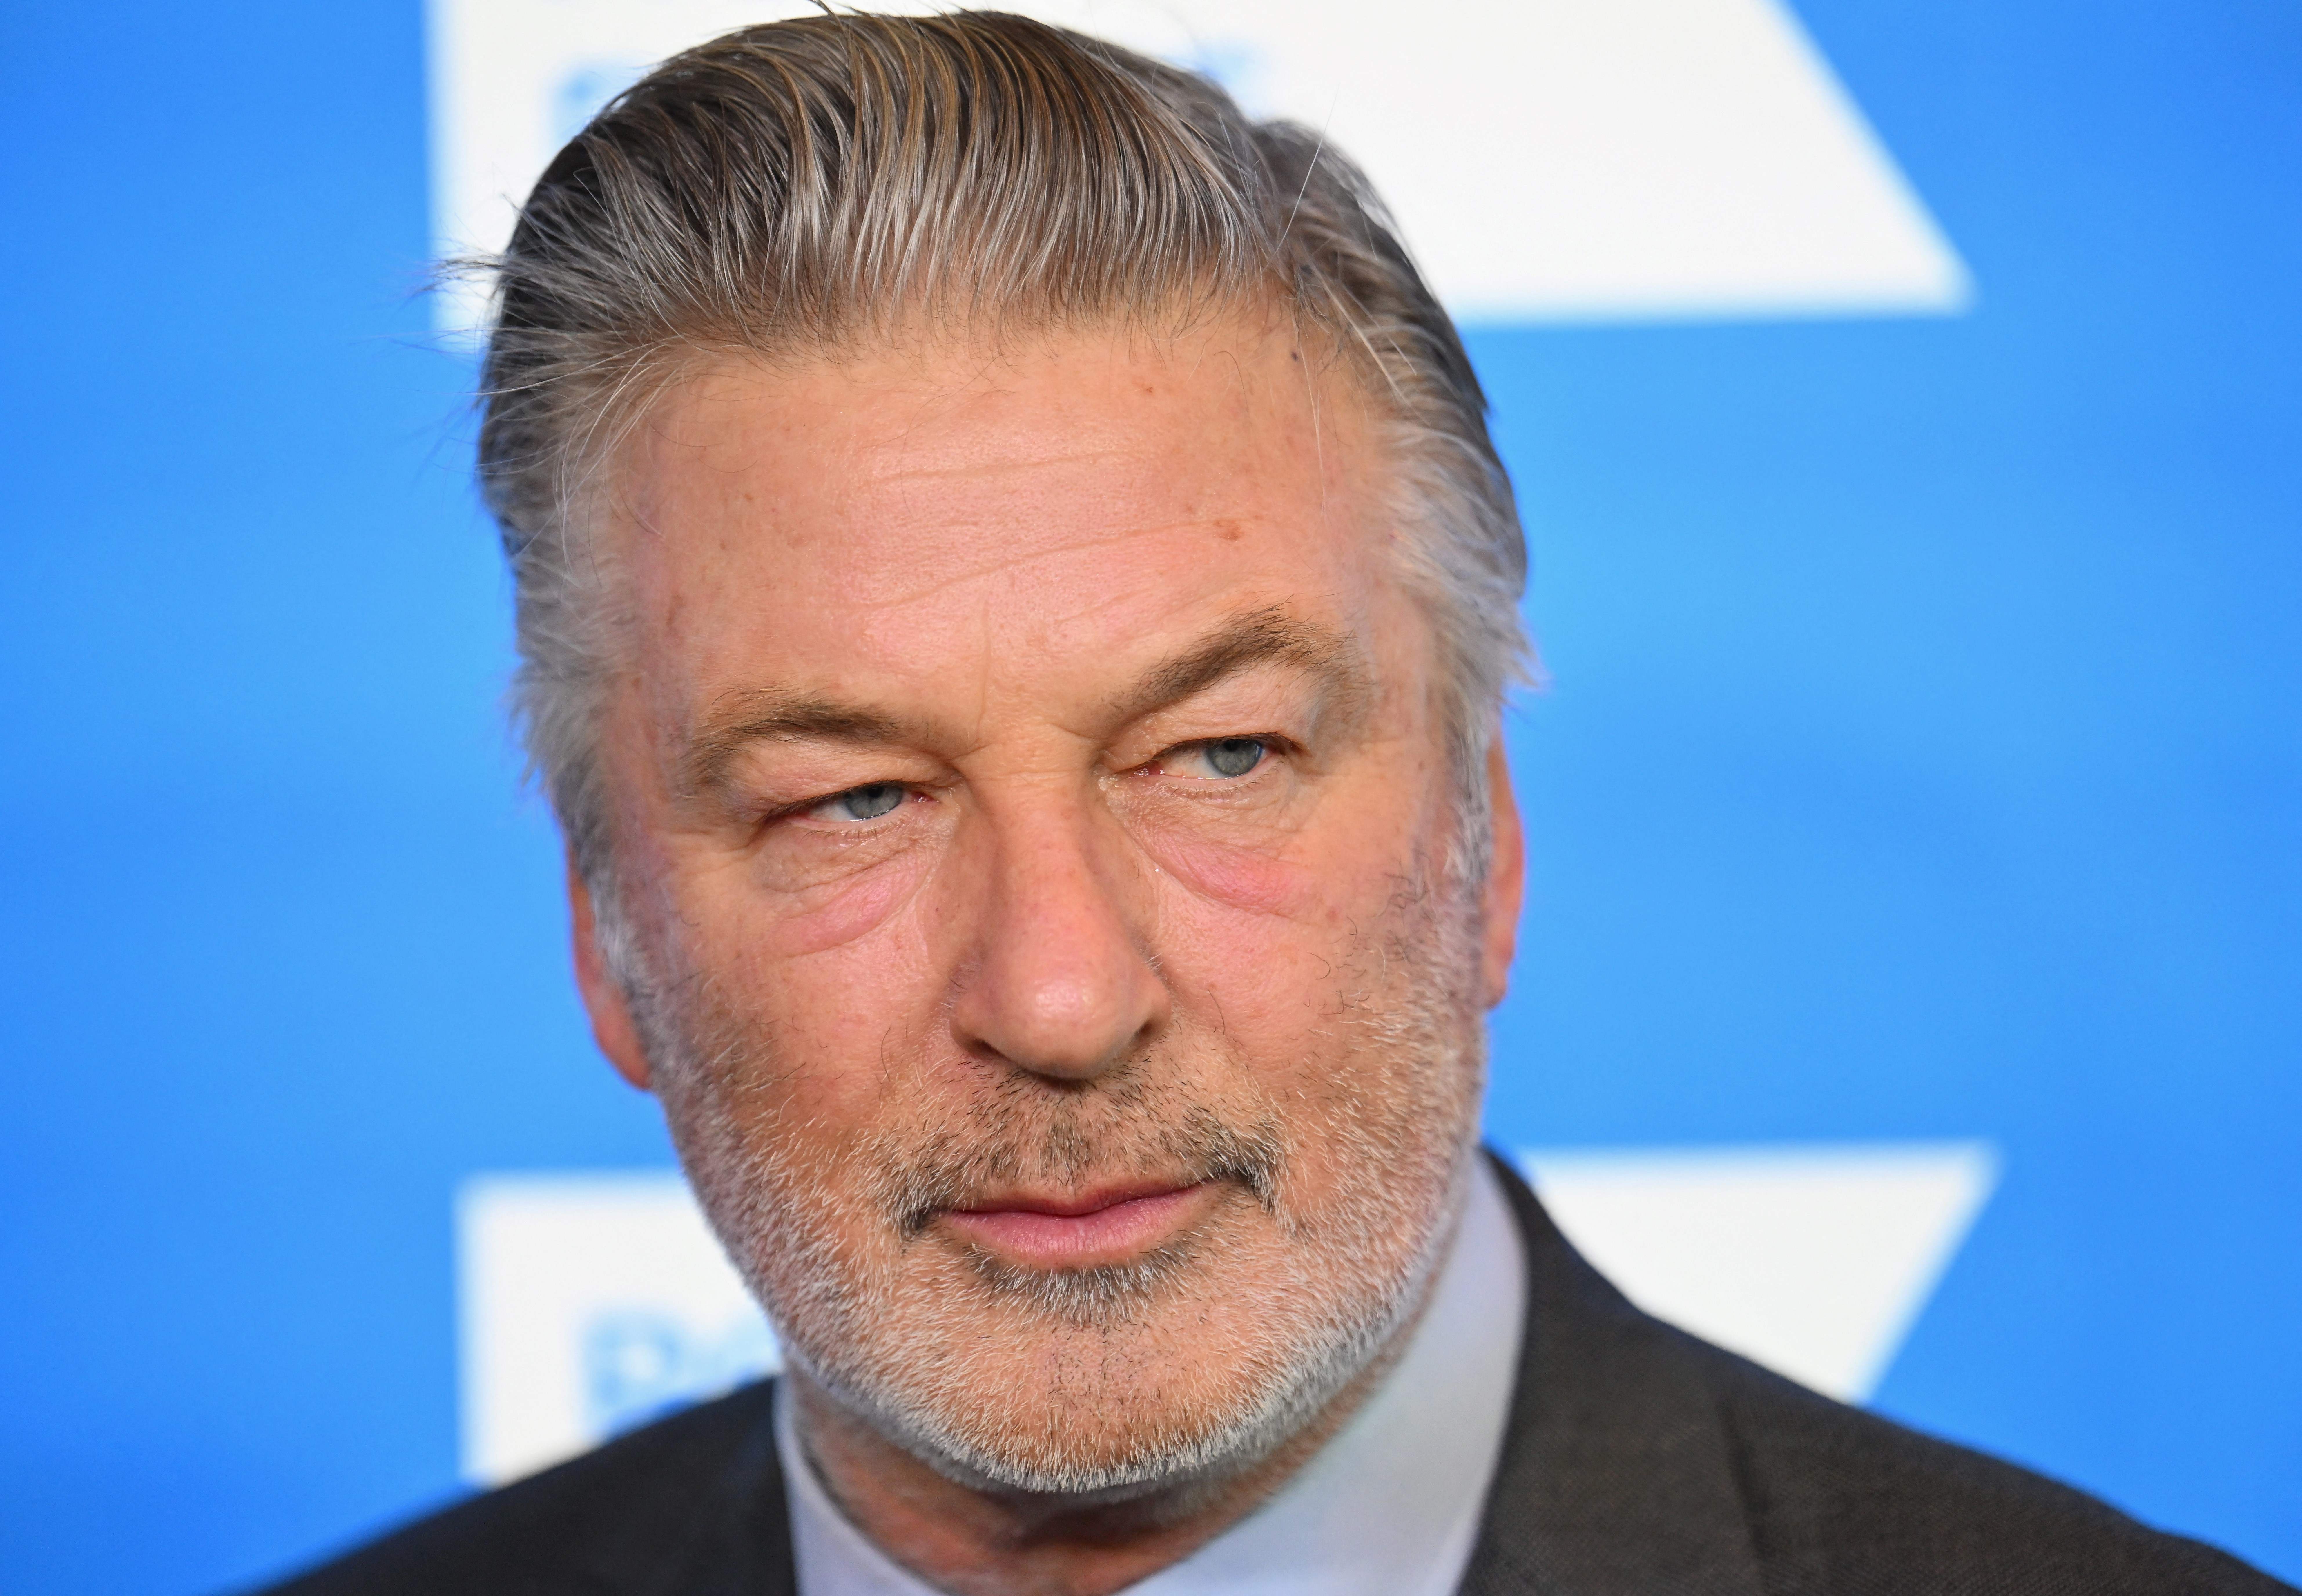 Alec Baldwin, appearing here at the 2022 Robert F. Kennedy Human Rights Ripple of Hope Award Gala, will go to court to face involuntary manslaughter charges on 10 July